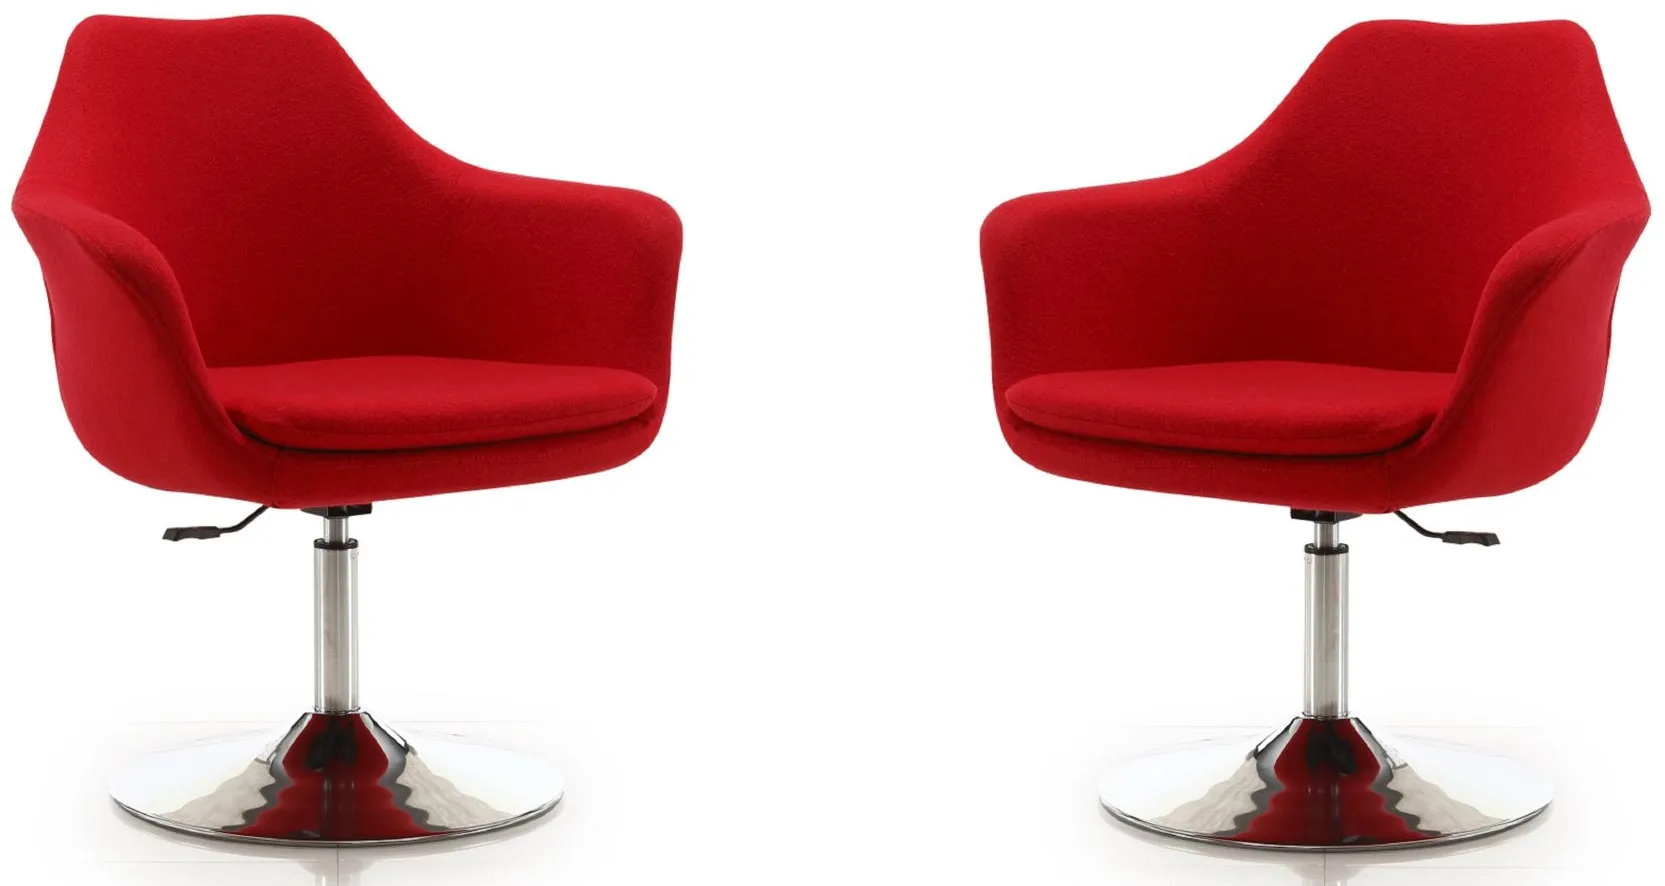 Kinsey Adjustable Height Swivel Accent Chair (Set of 2) in Red and Polished Chrome by Manhattan Comfort